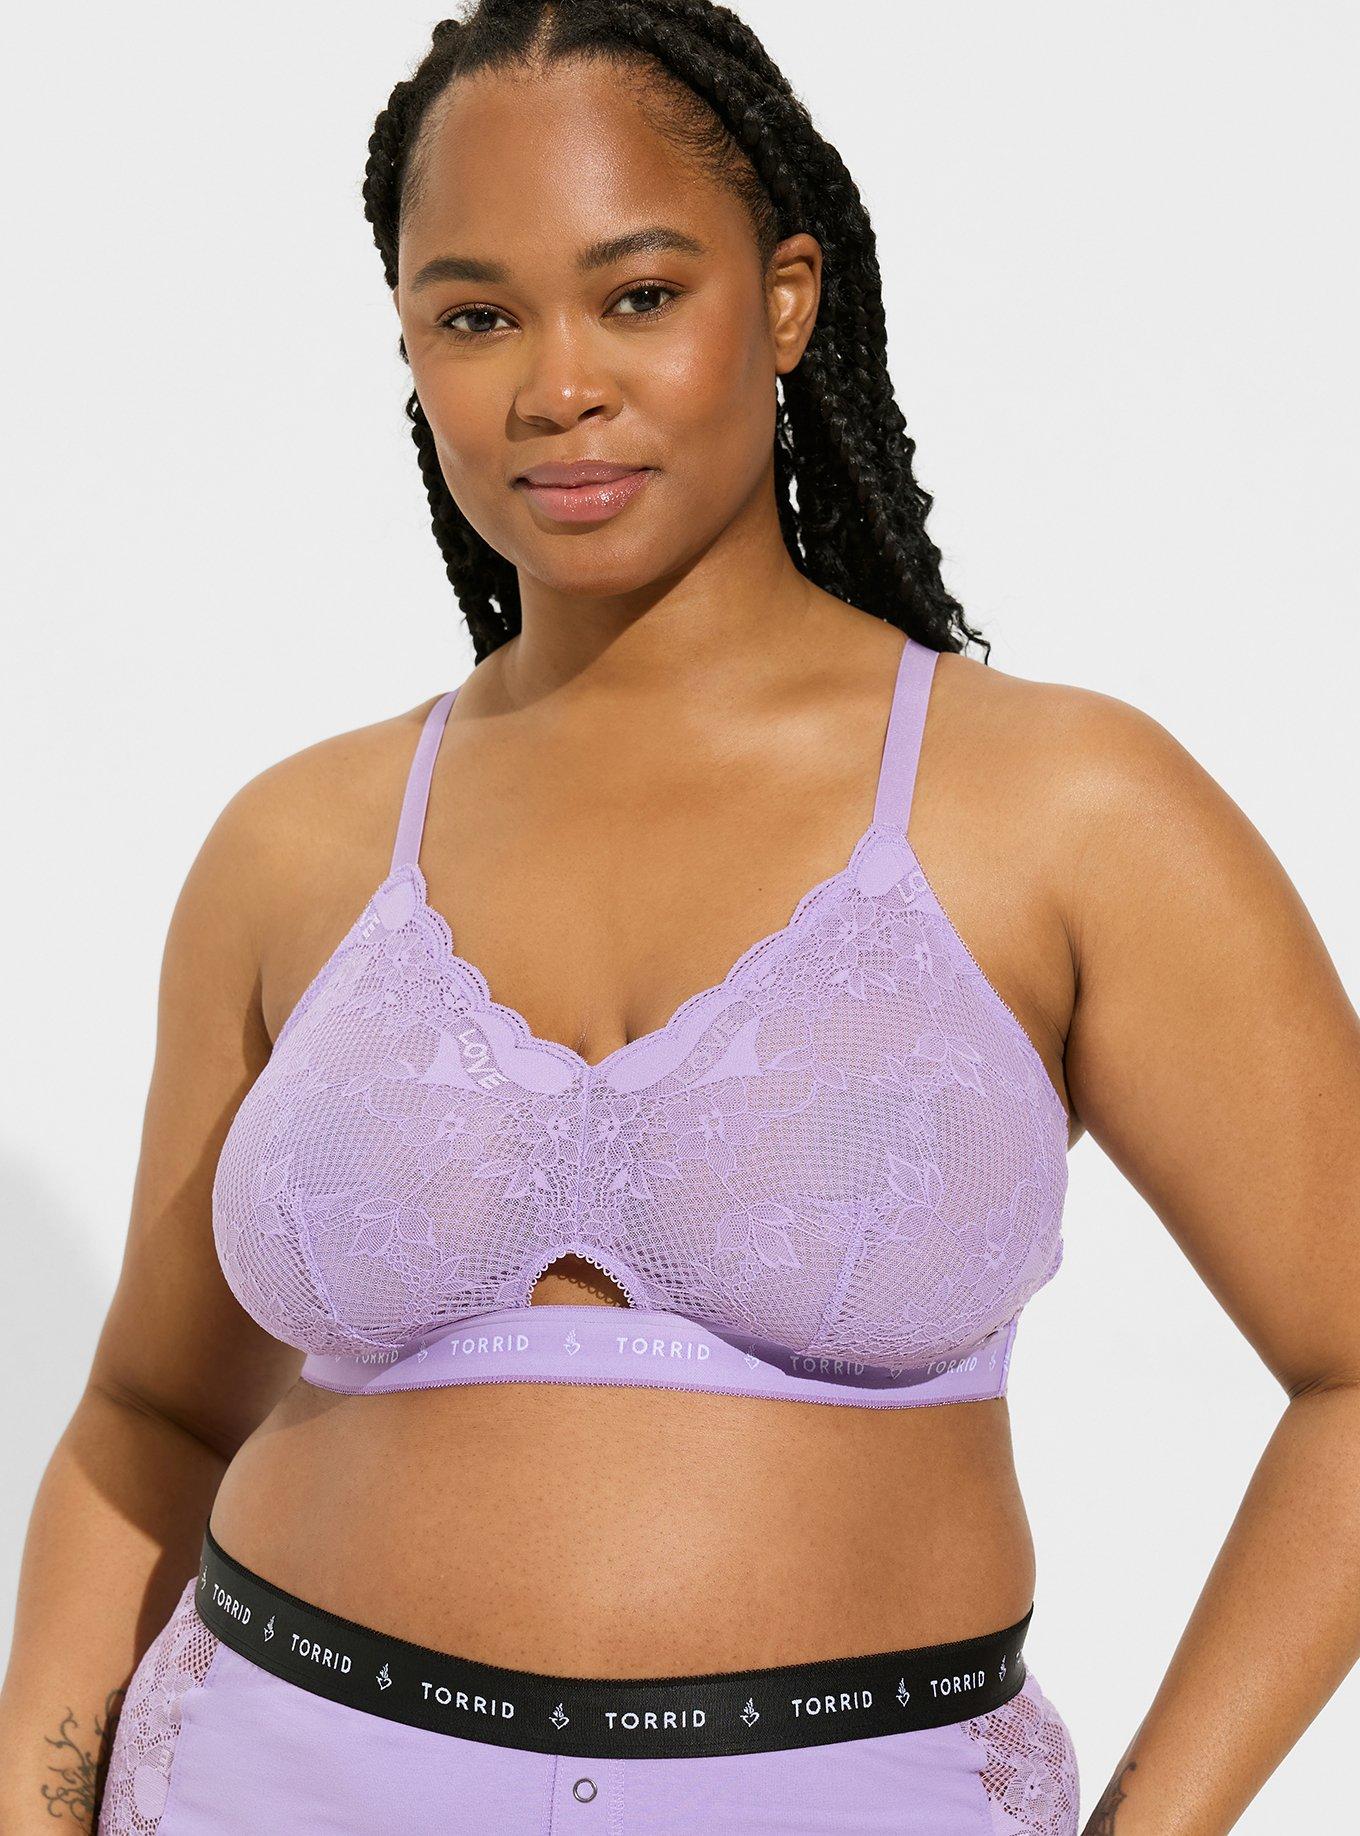 Out From Under Seamless Stretch Lace Bralette  Urban Outfitters Japan -  Clothing, Music, Home & Accessories